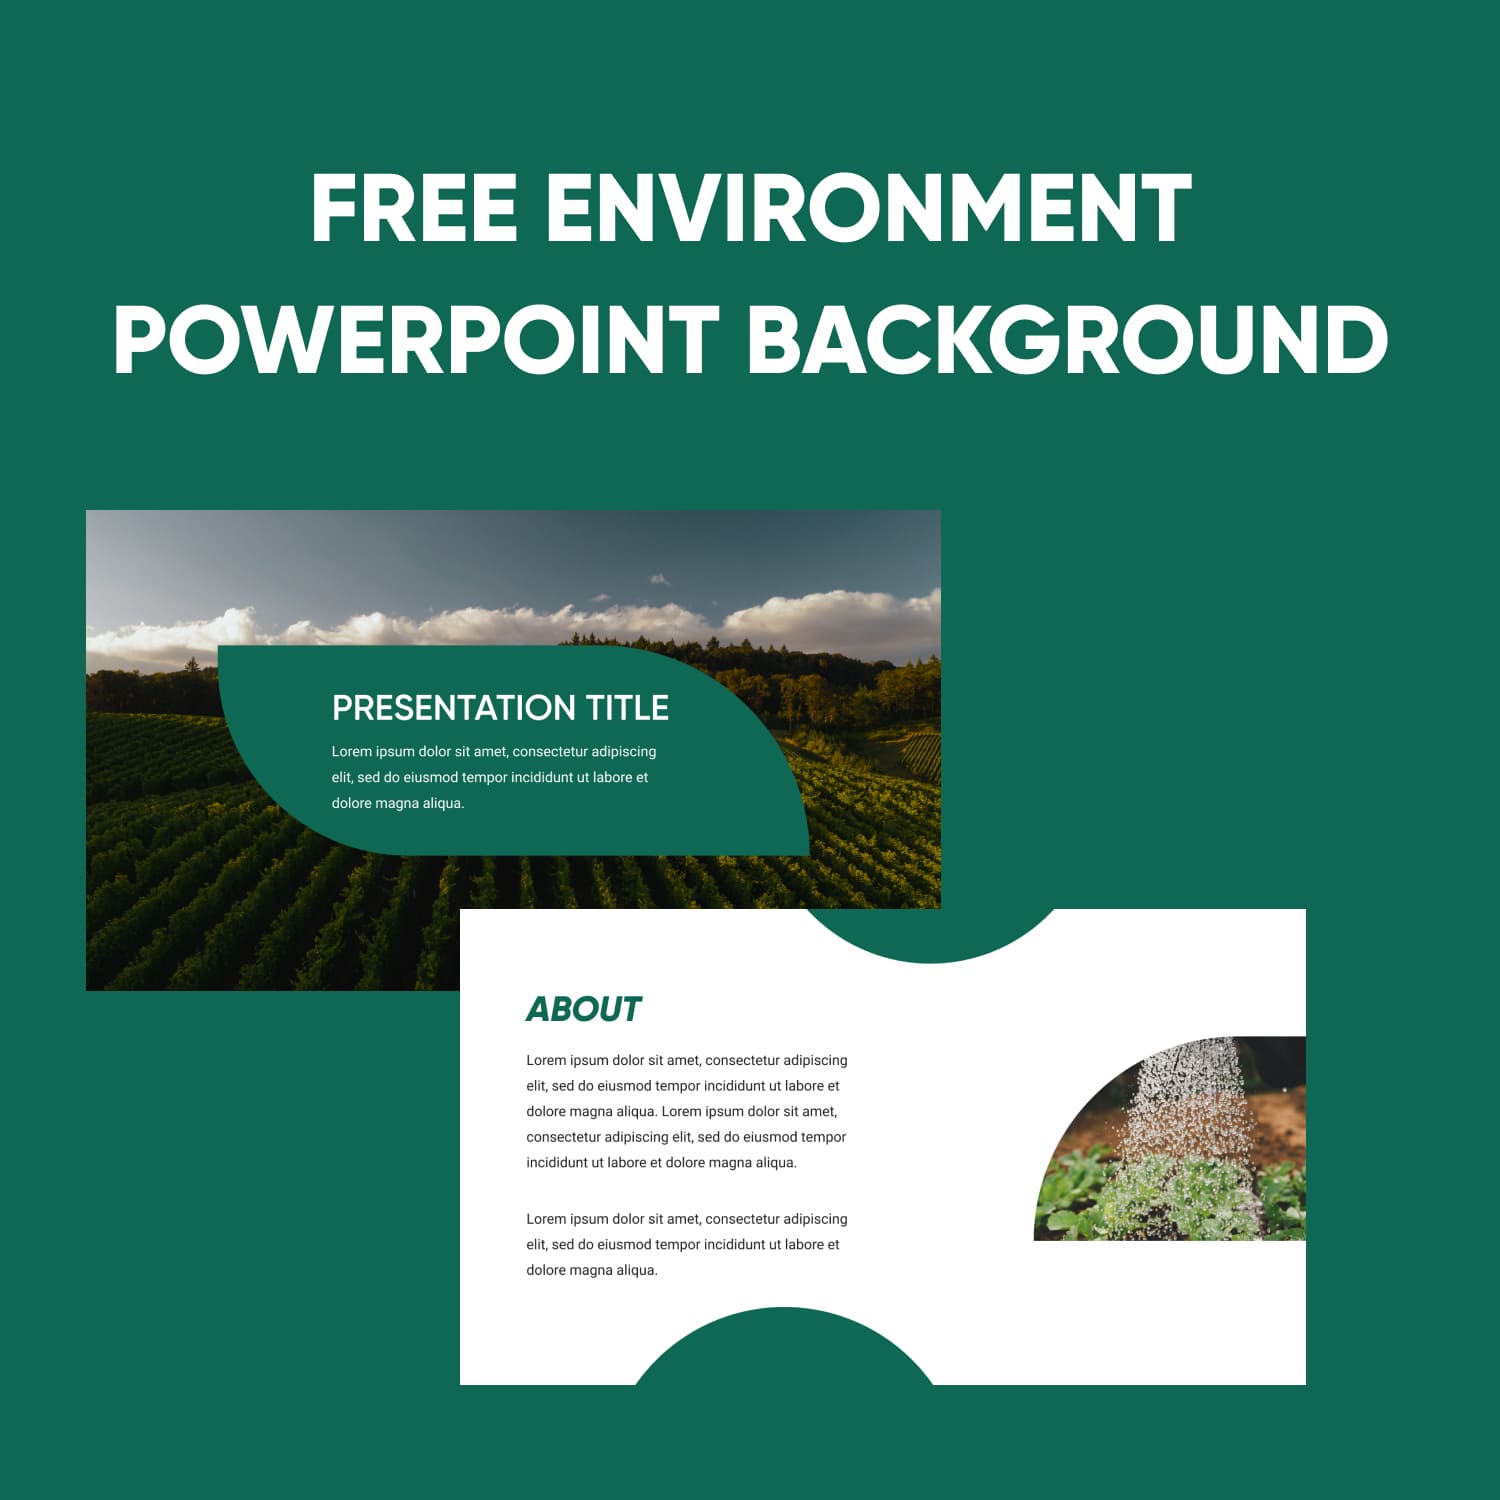 Free Environment Powerpoint Background.